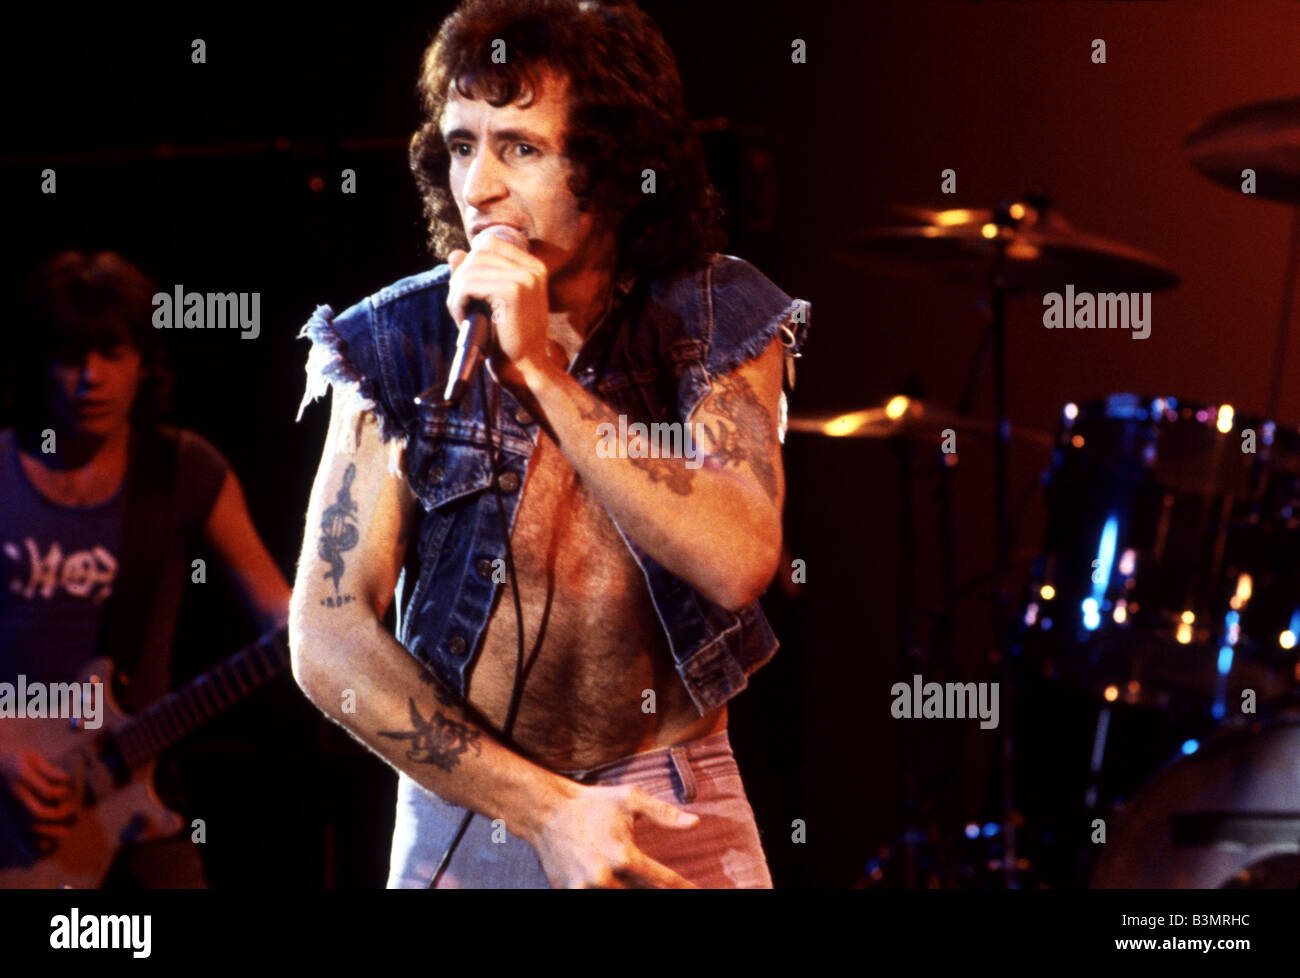 Bon Scott High Resolution Stock Photography and Images - Alamy